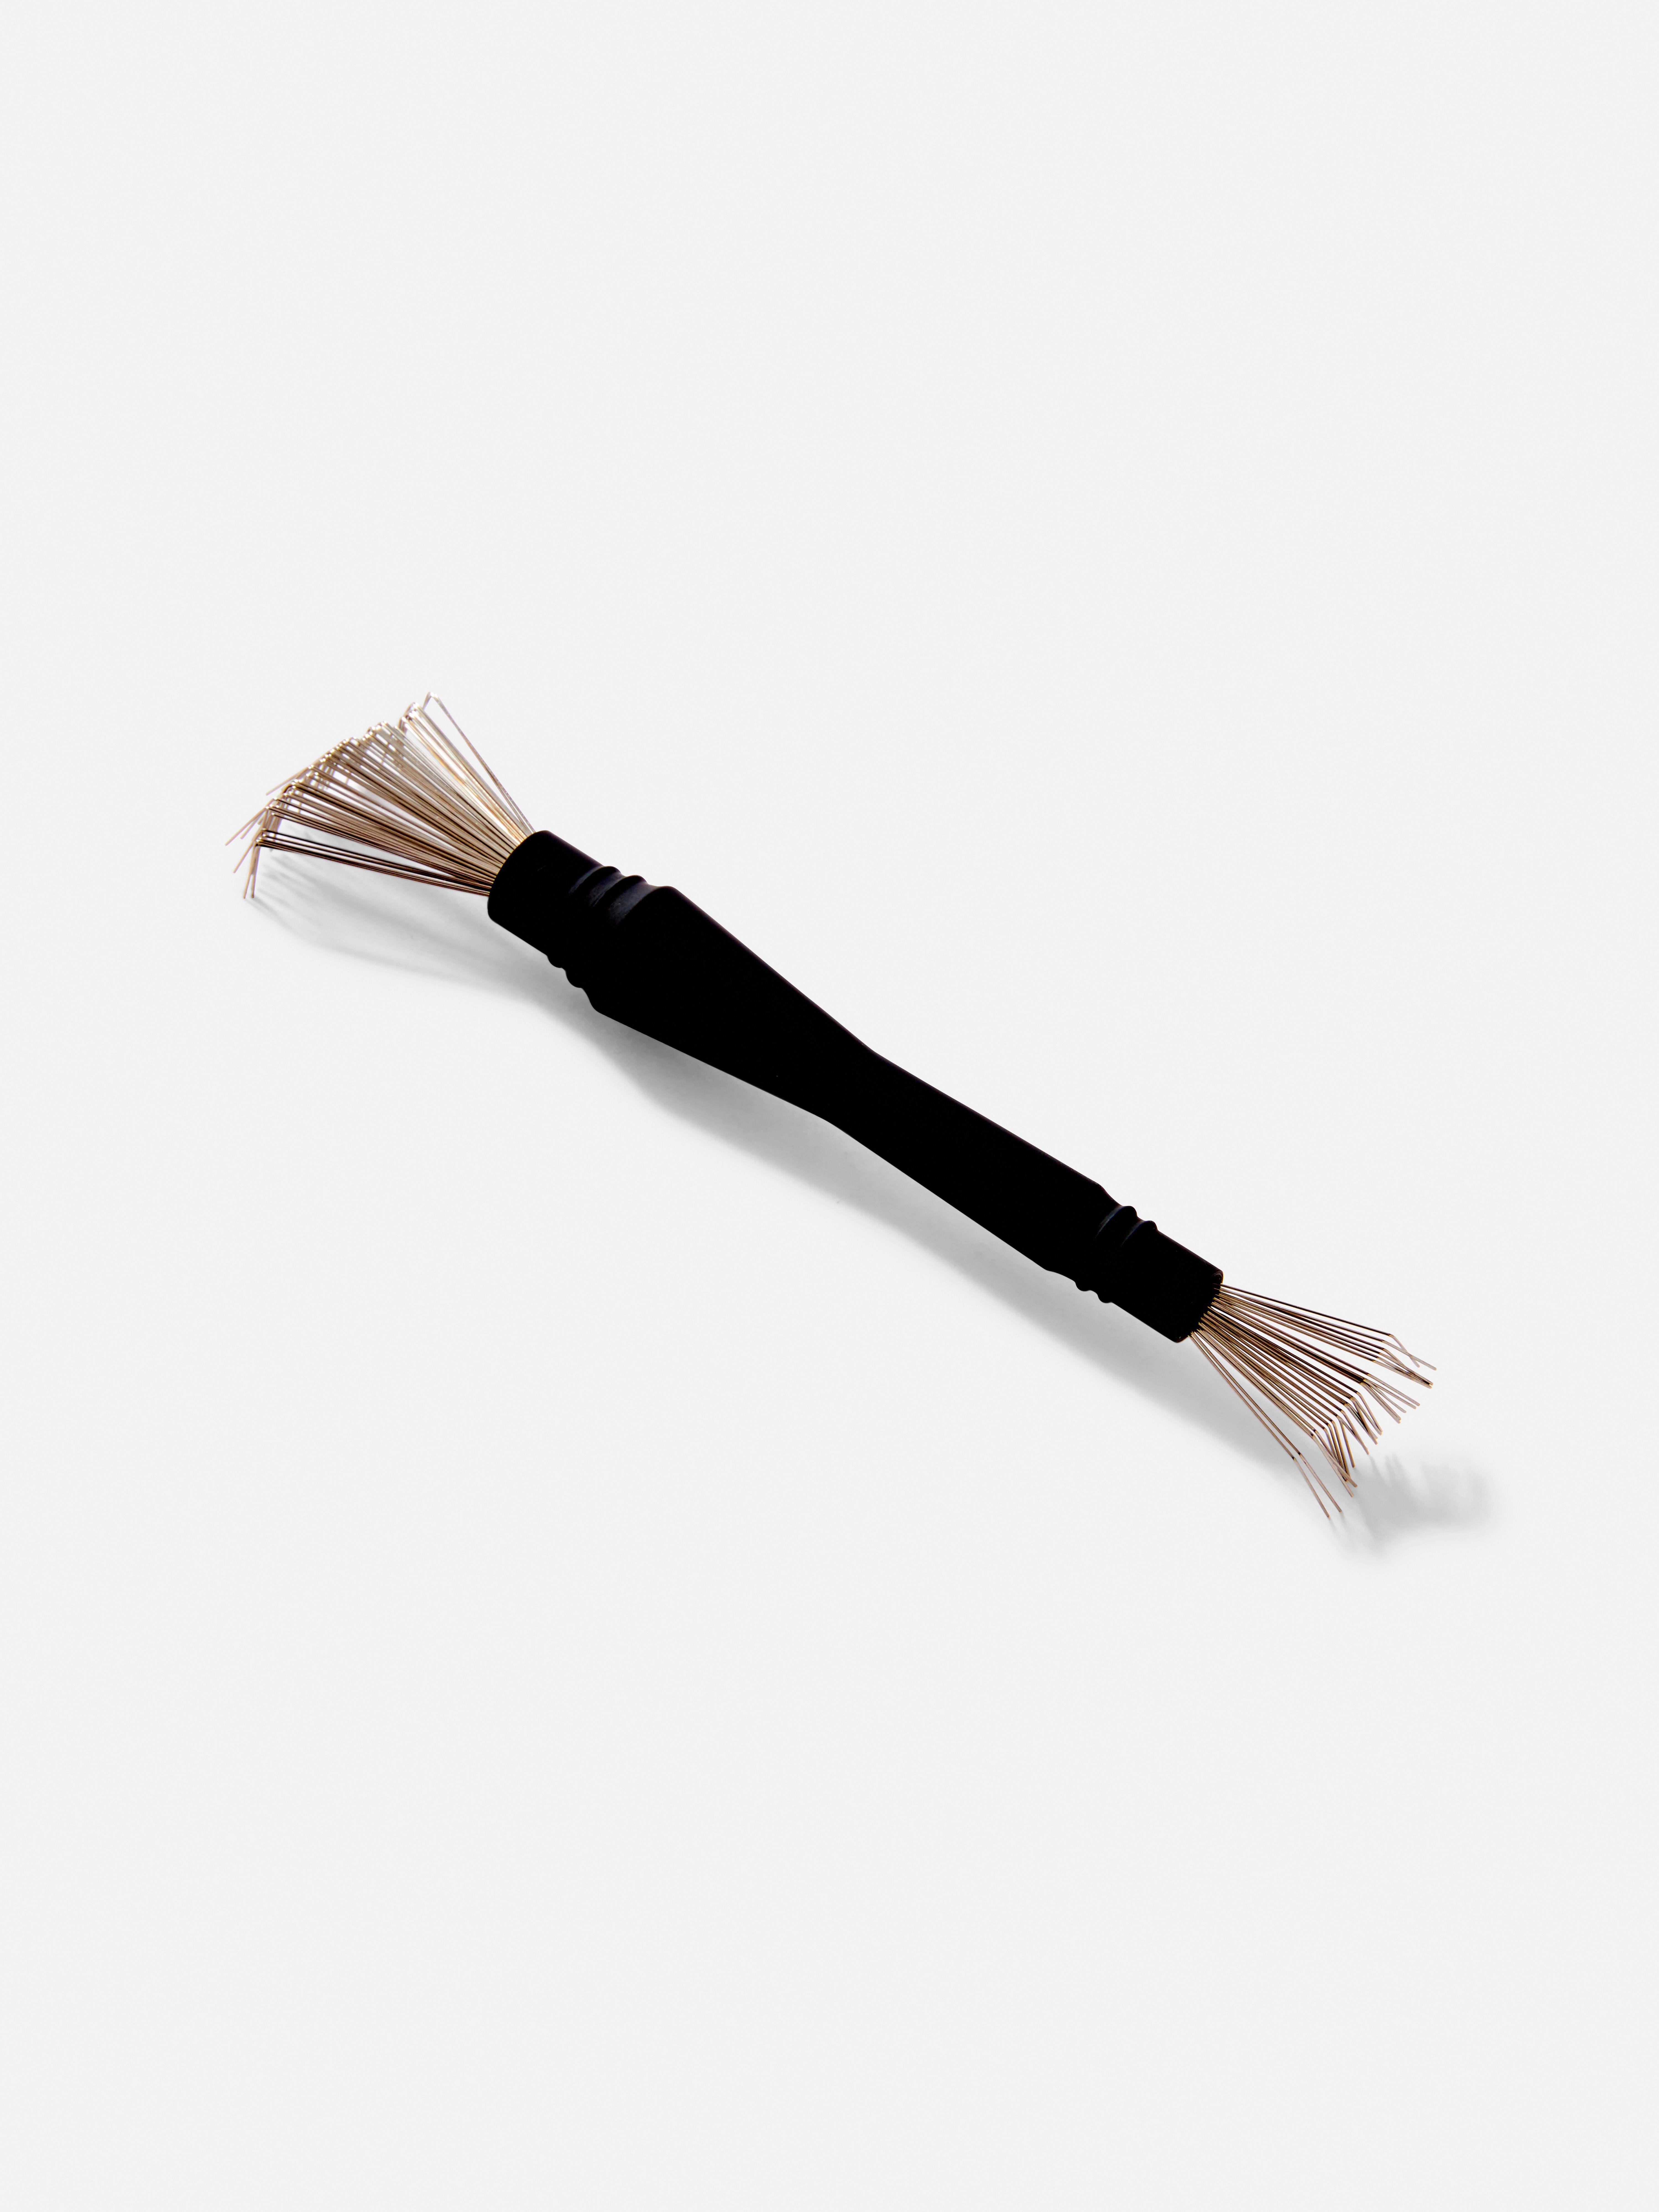 PS Hair Brush Cleaning Tool